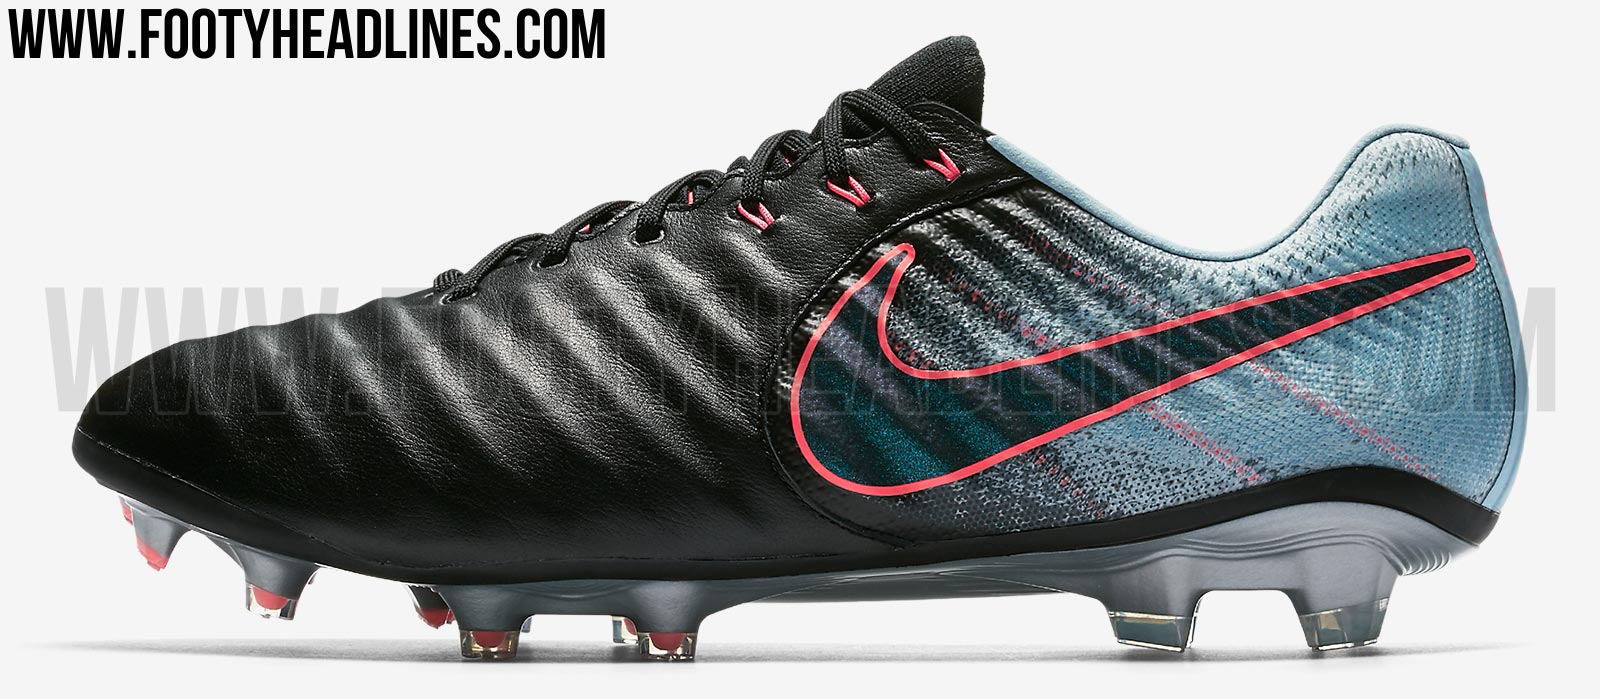 Black / Light Armory Blue' Tiempo Legend VII Rising Fast Boots Released - Footy Headlines